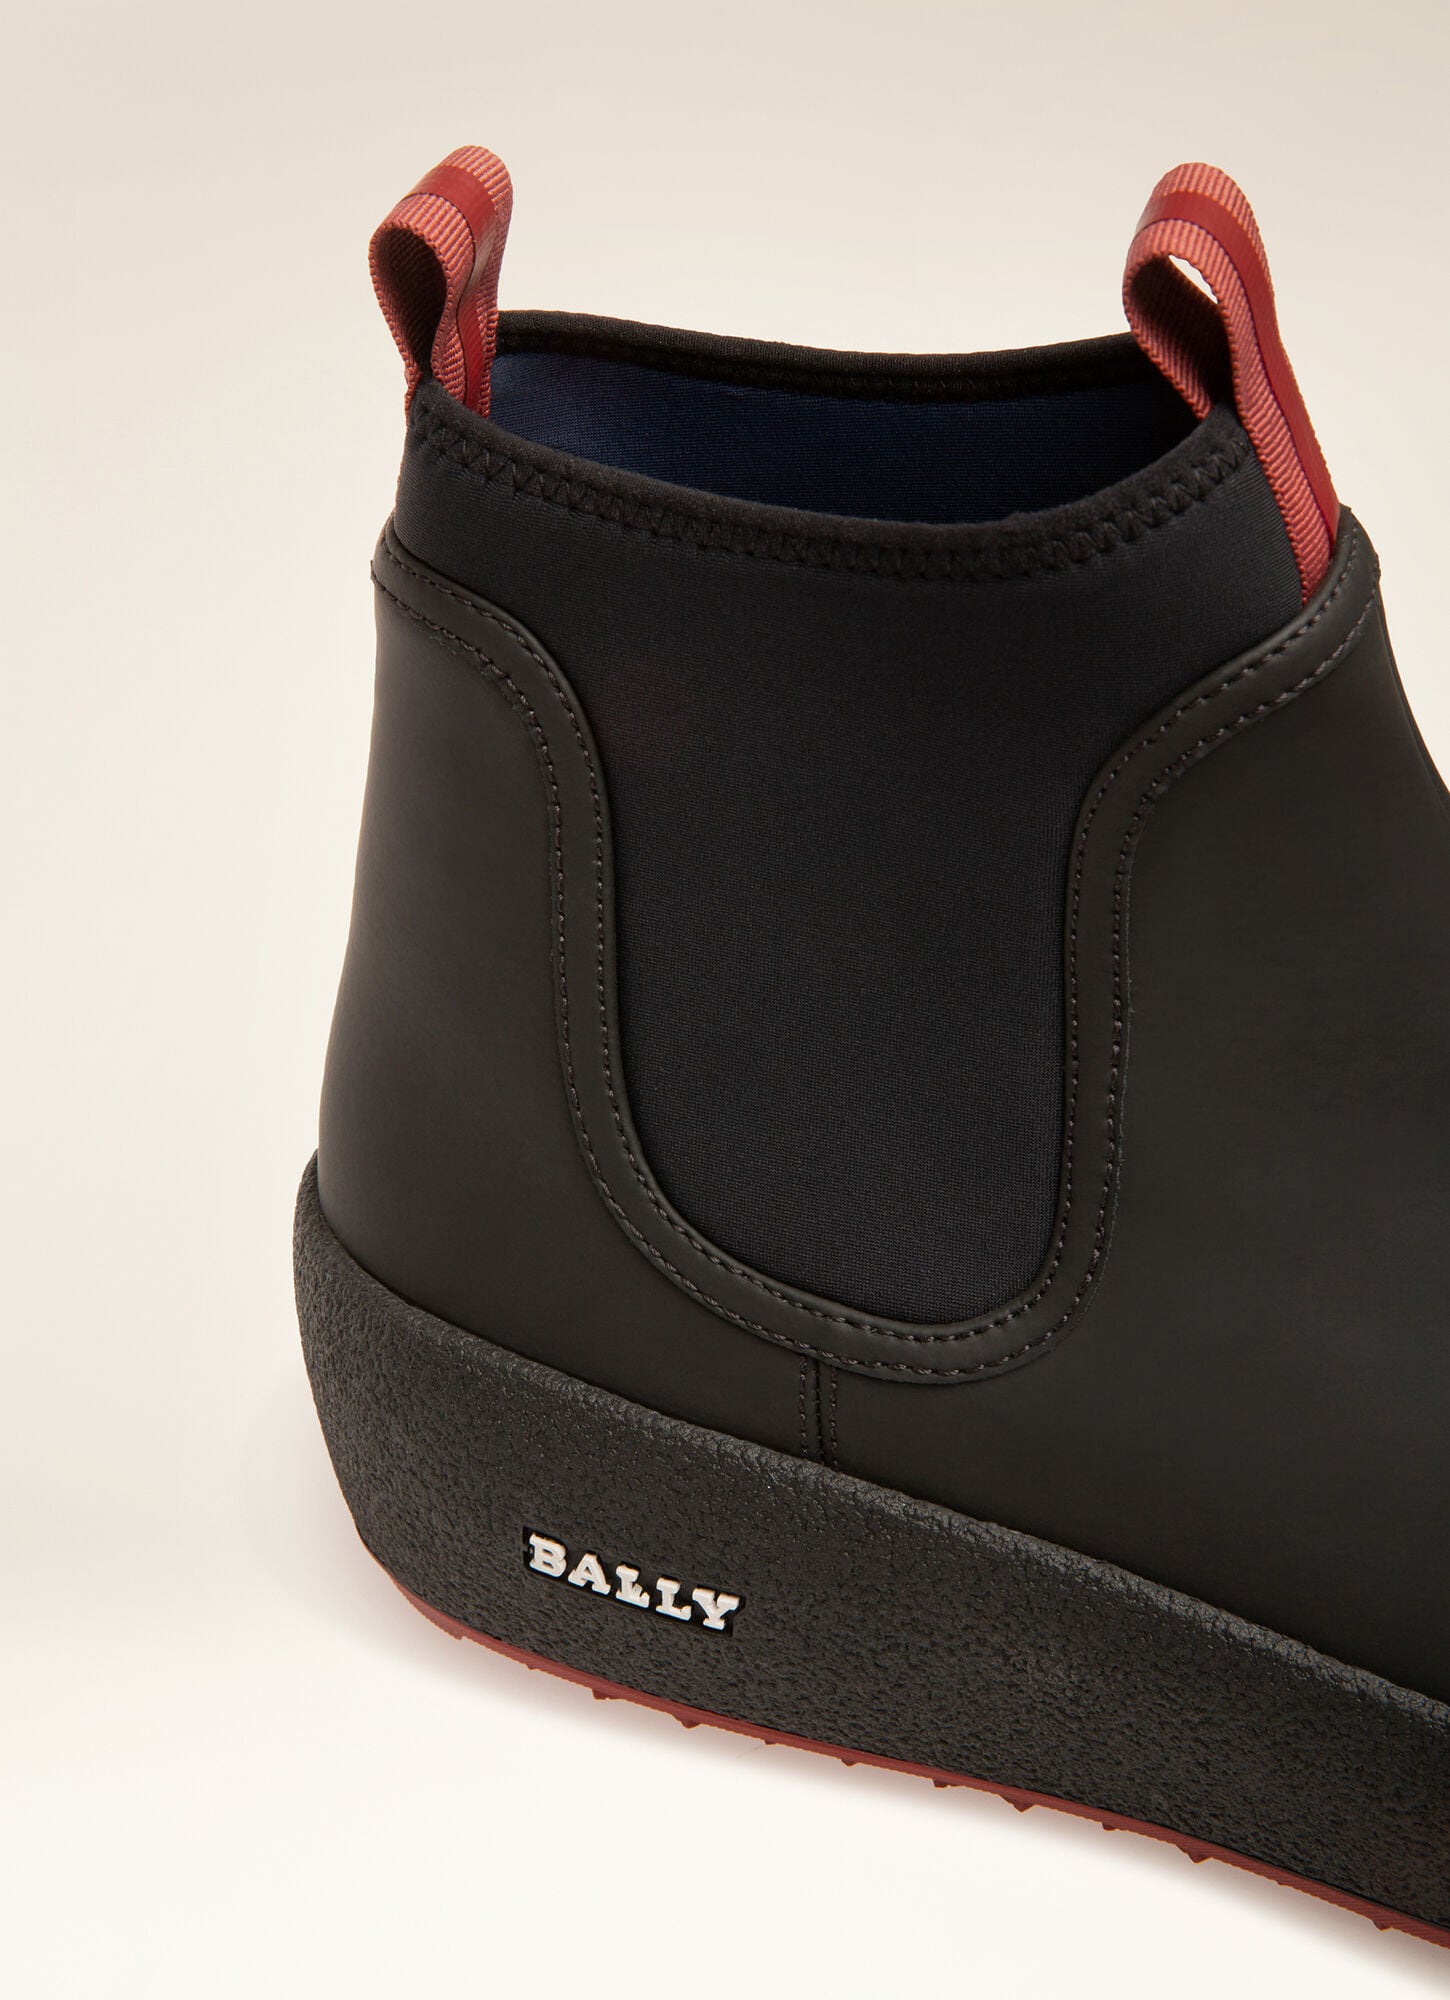 Cubrid | Mens Snow Boots | Black Leather | Bally